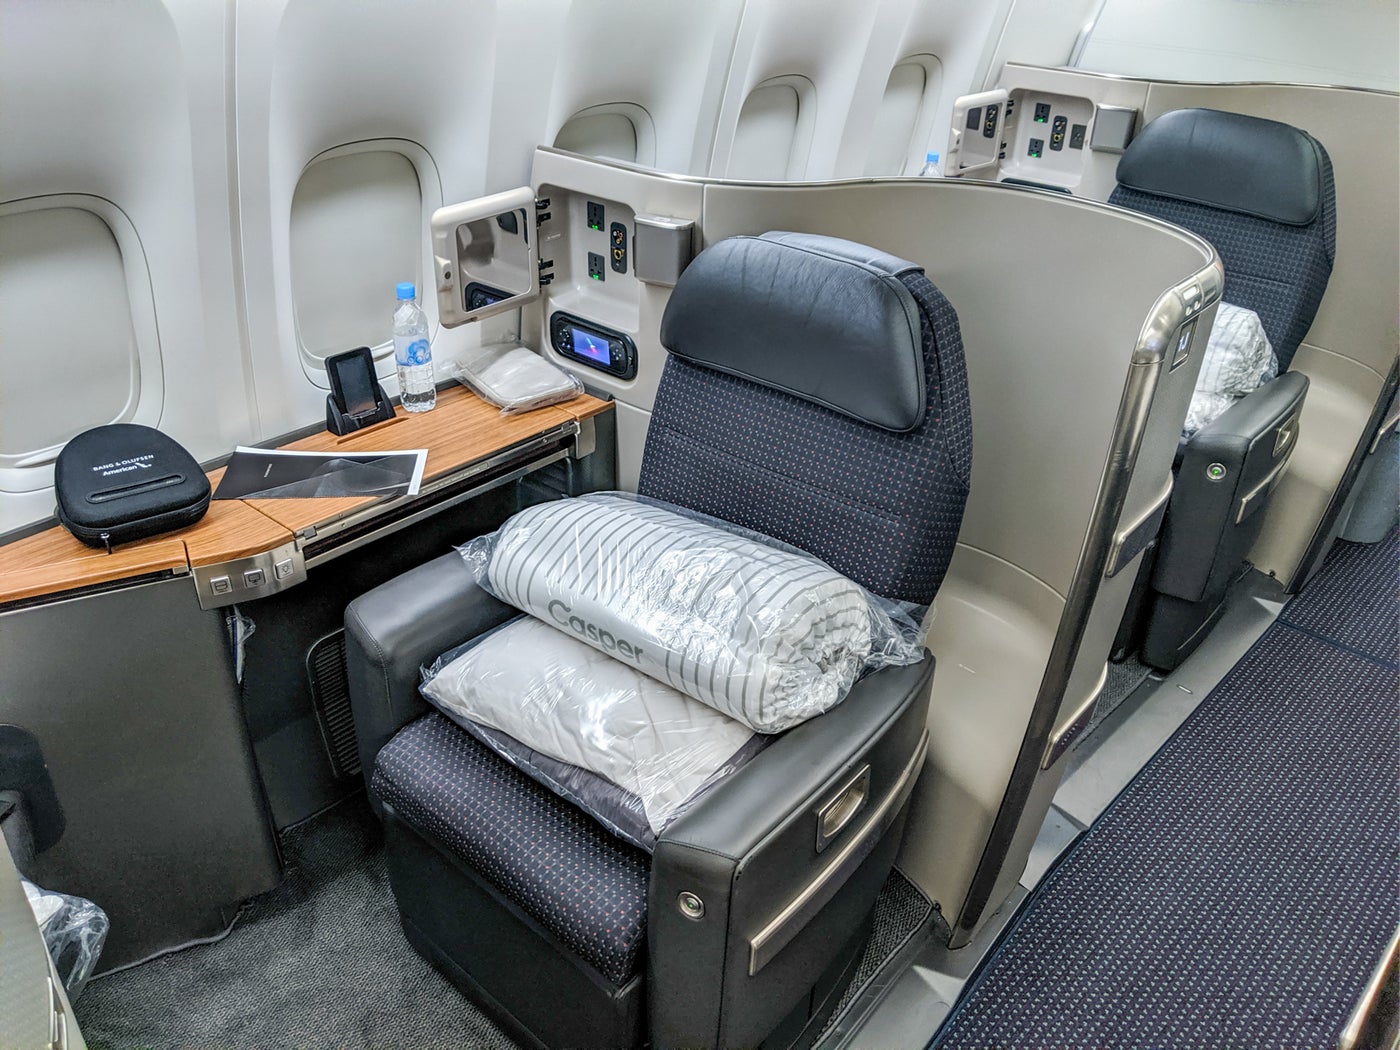 How to fly American Airlines Flagship First class in 2021 - The Points Guy